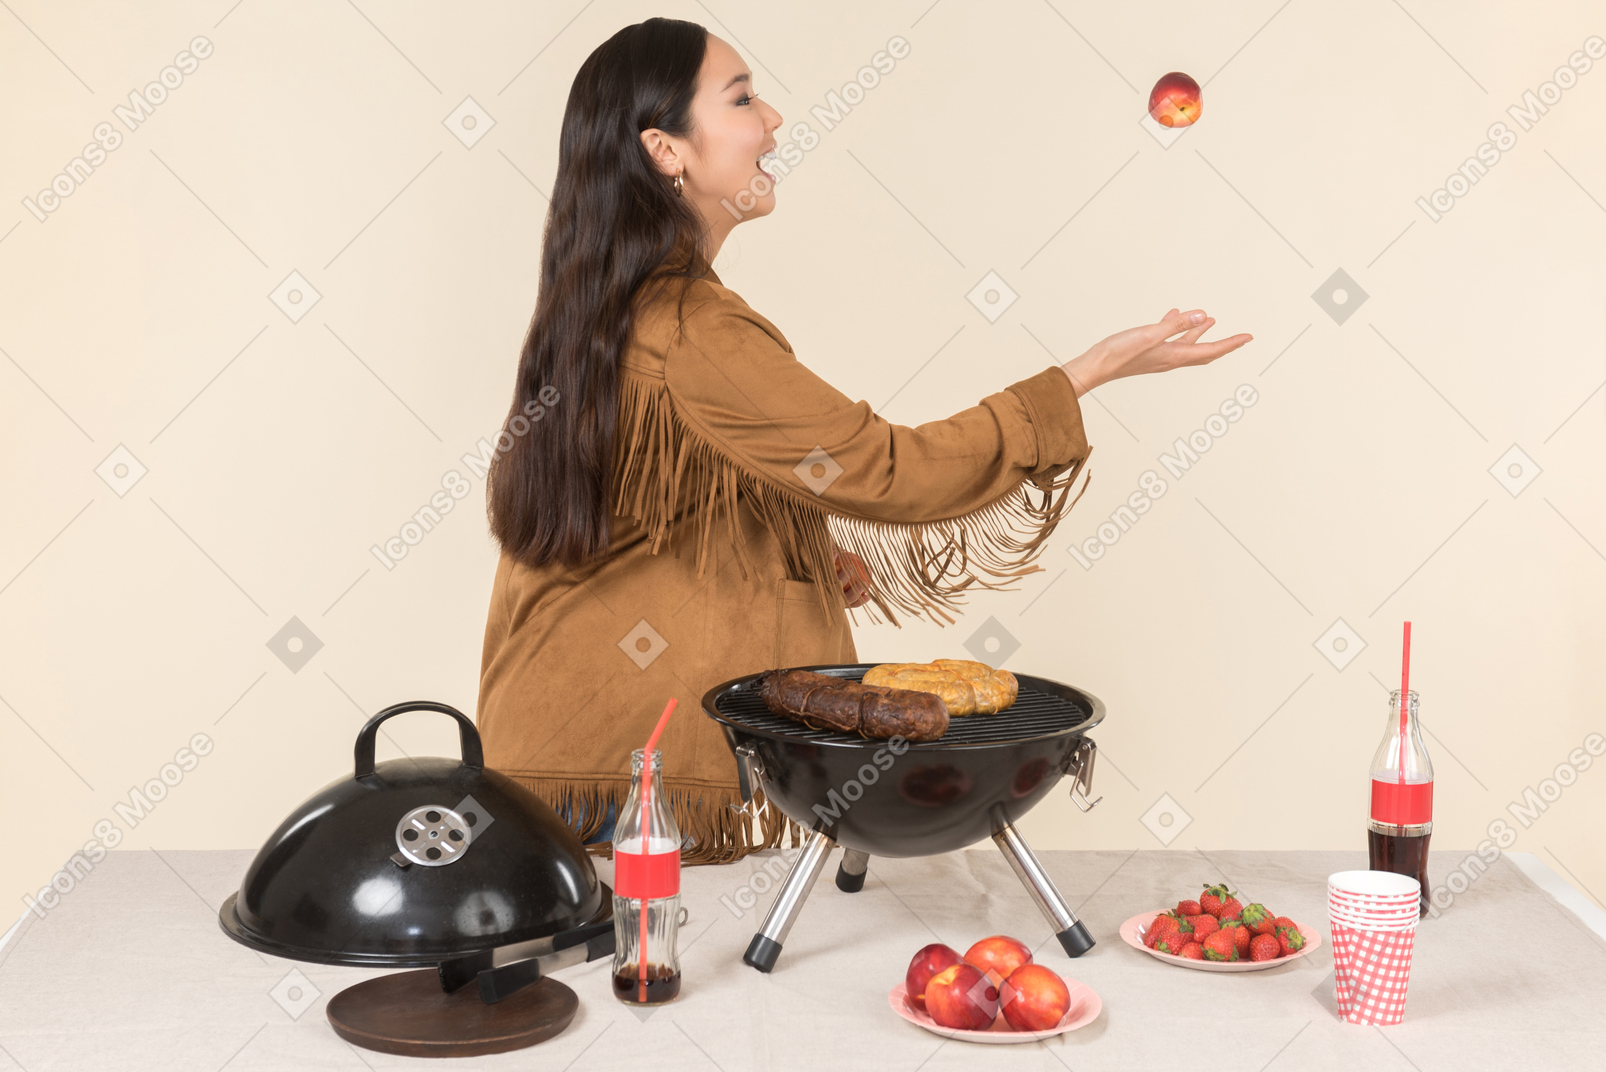 Young asian woman standing near grill and throwing a fruit